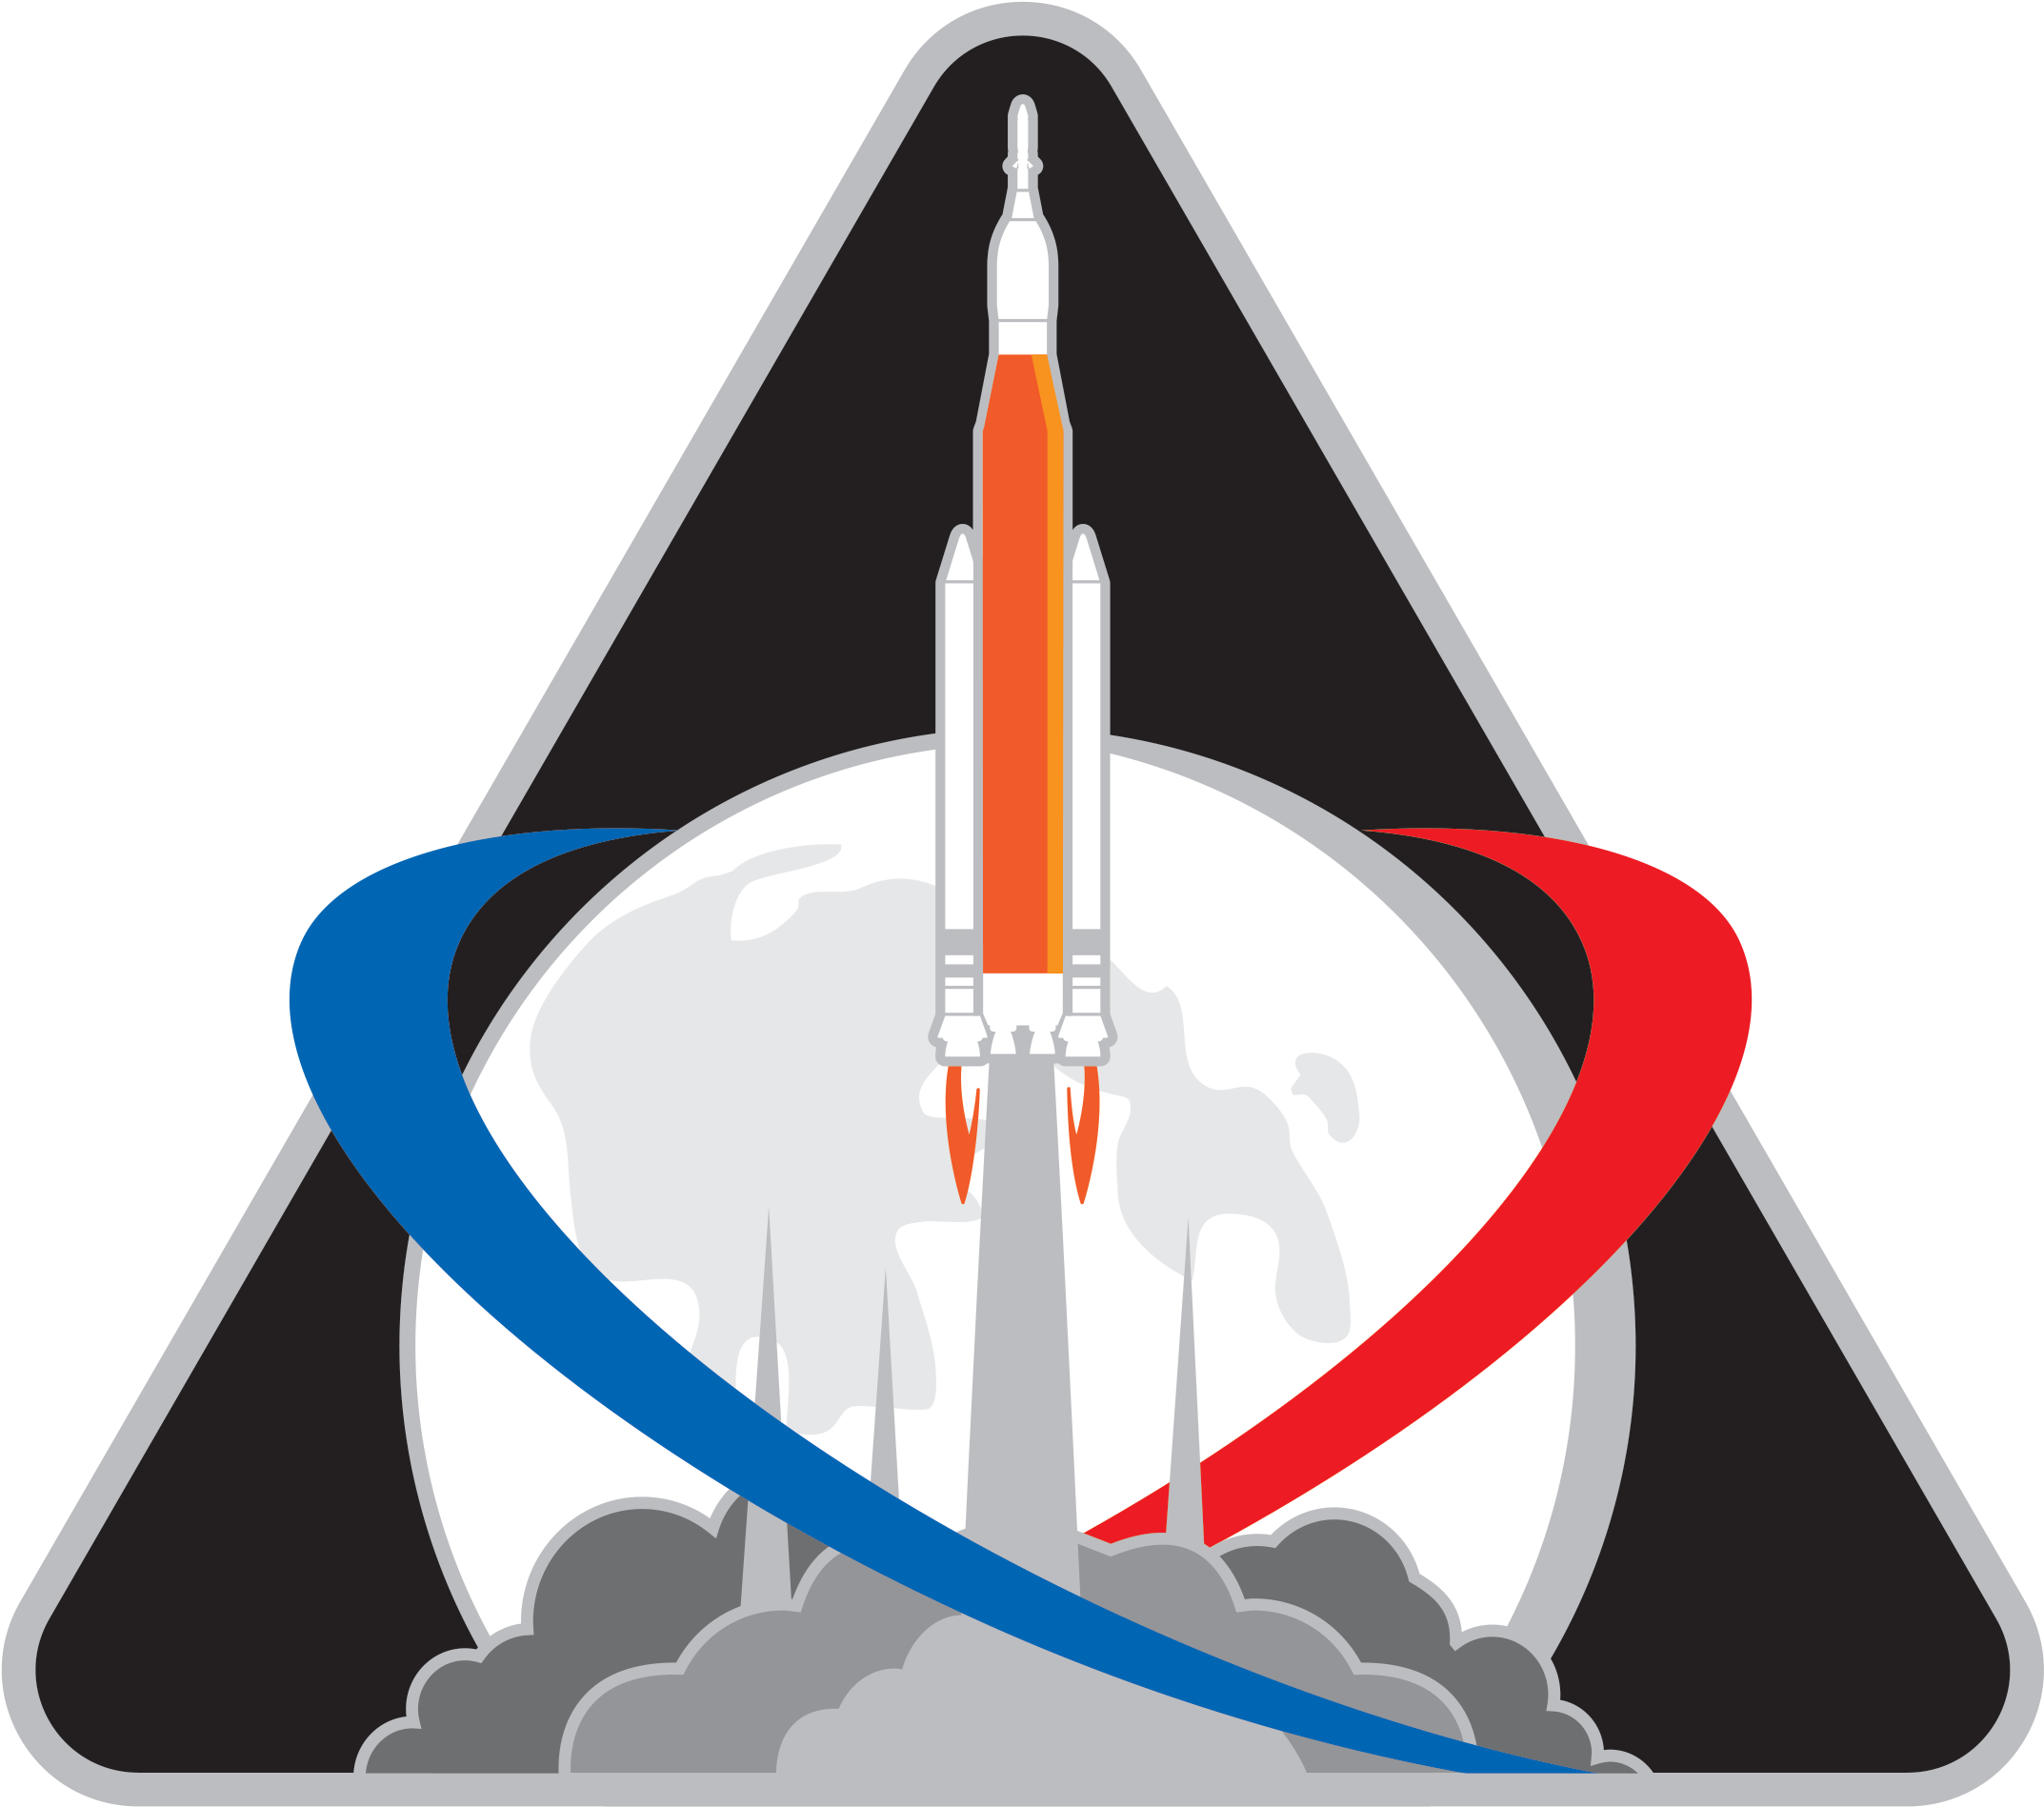 Here Is The Design For The Exploration Mission 1 Patch - Nasa Em 1 Patch (2177x1906)